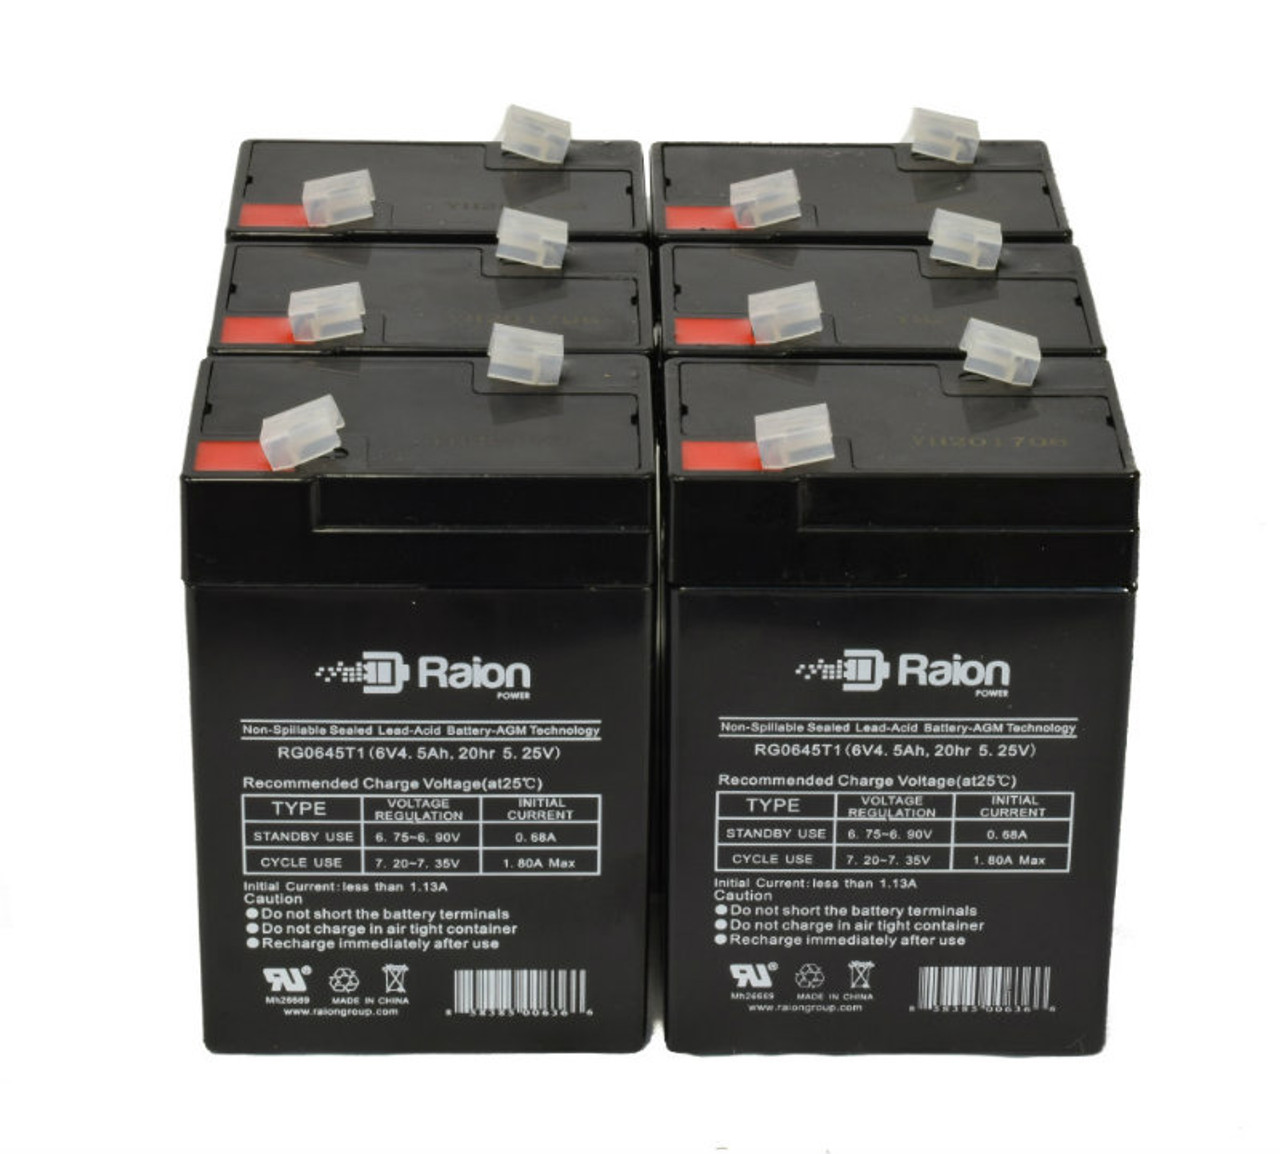 Raion Power 6 Volt 4.5Ah RG0645T1 Replacement Battery for Delta HR 6-4.5 - 6 Pack